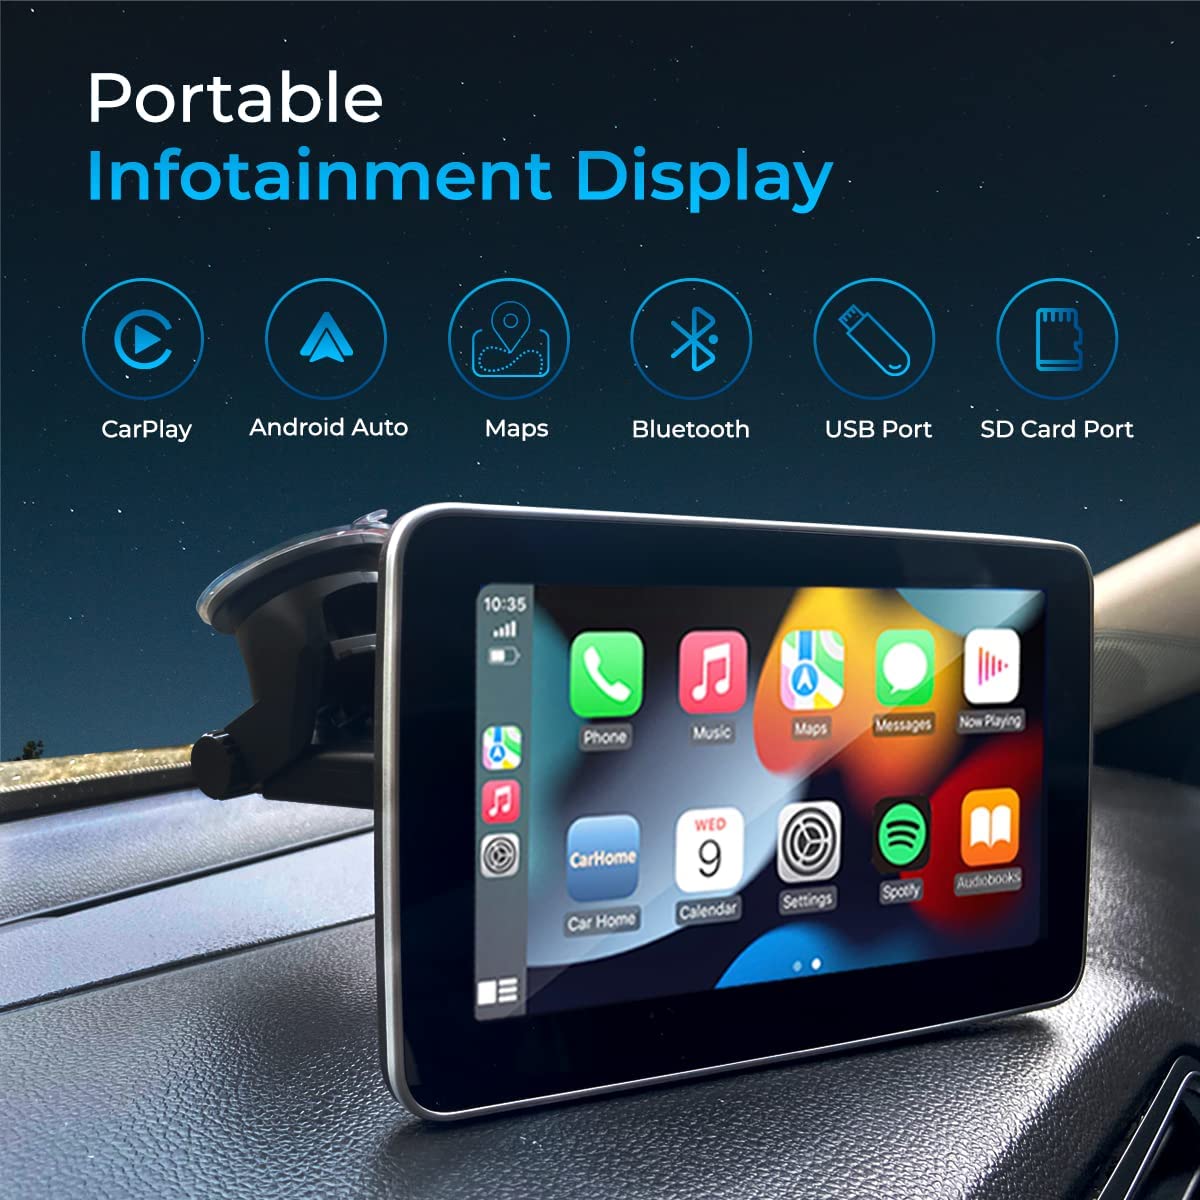 AutoSky 7 Portable Infotainment Display Wireless and Wired - AutoSky